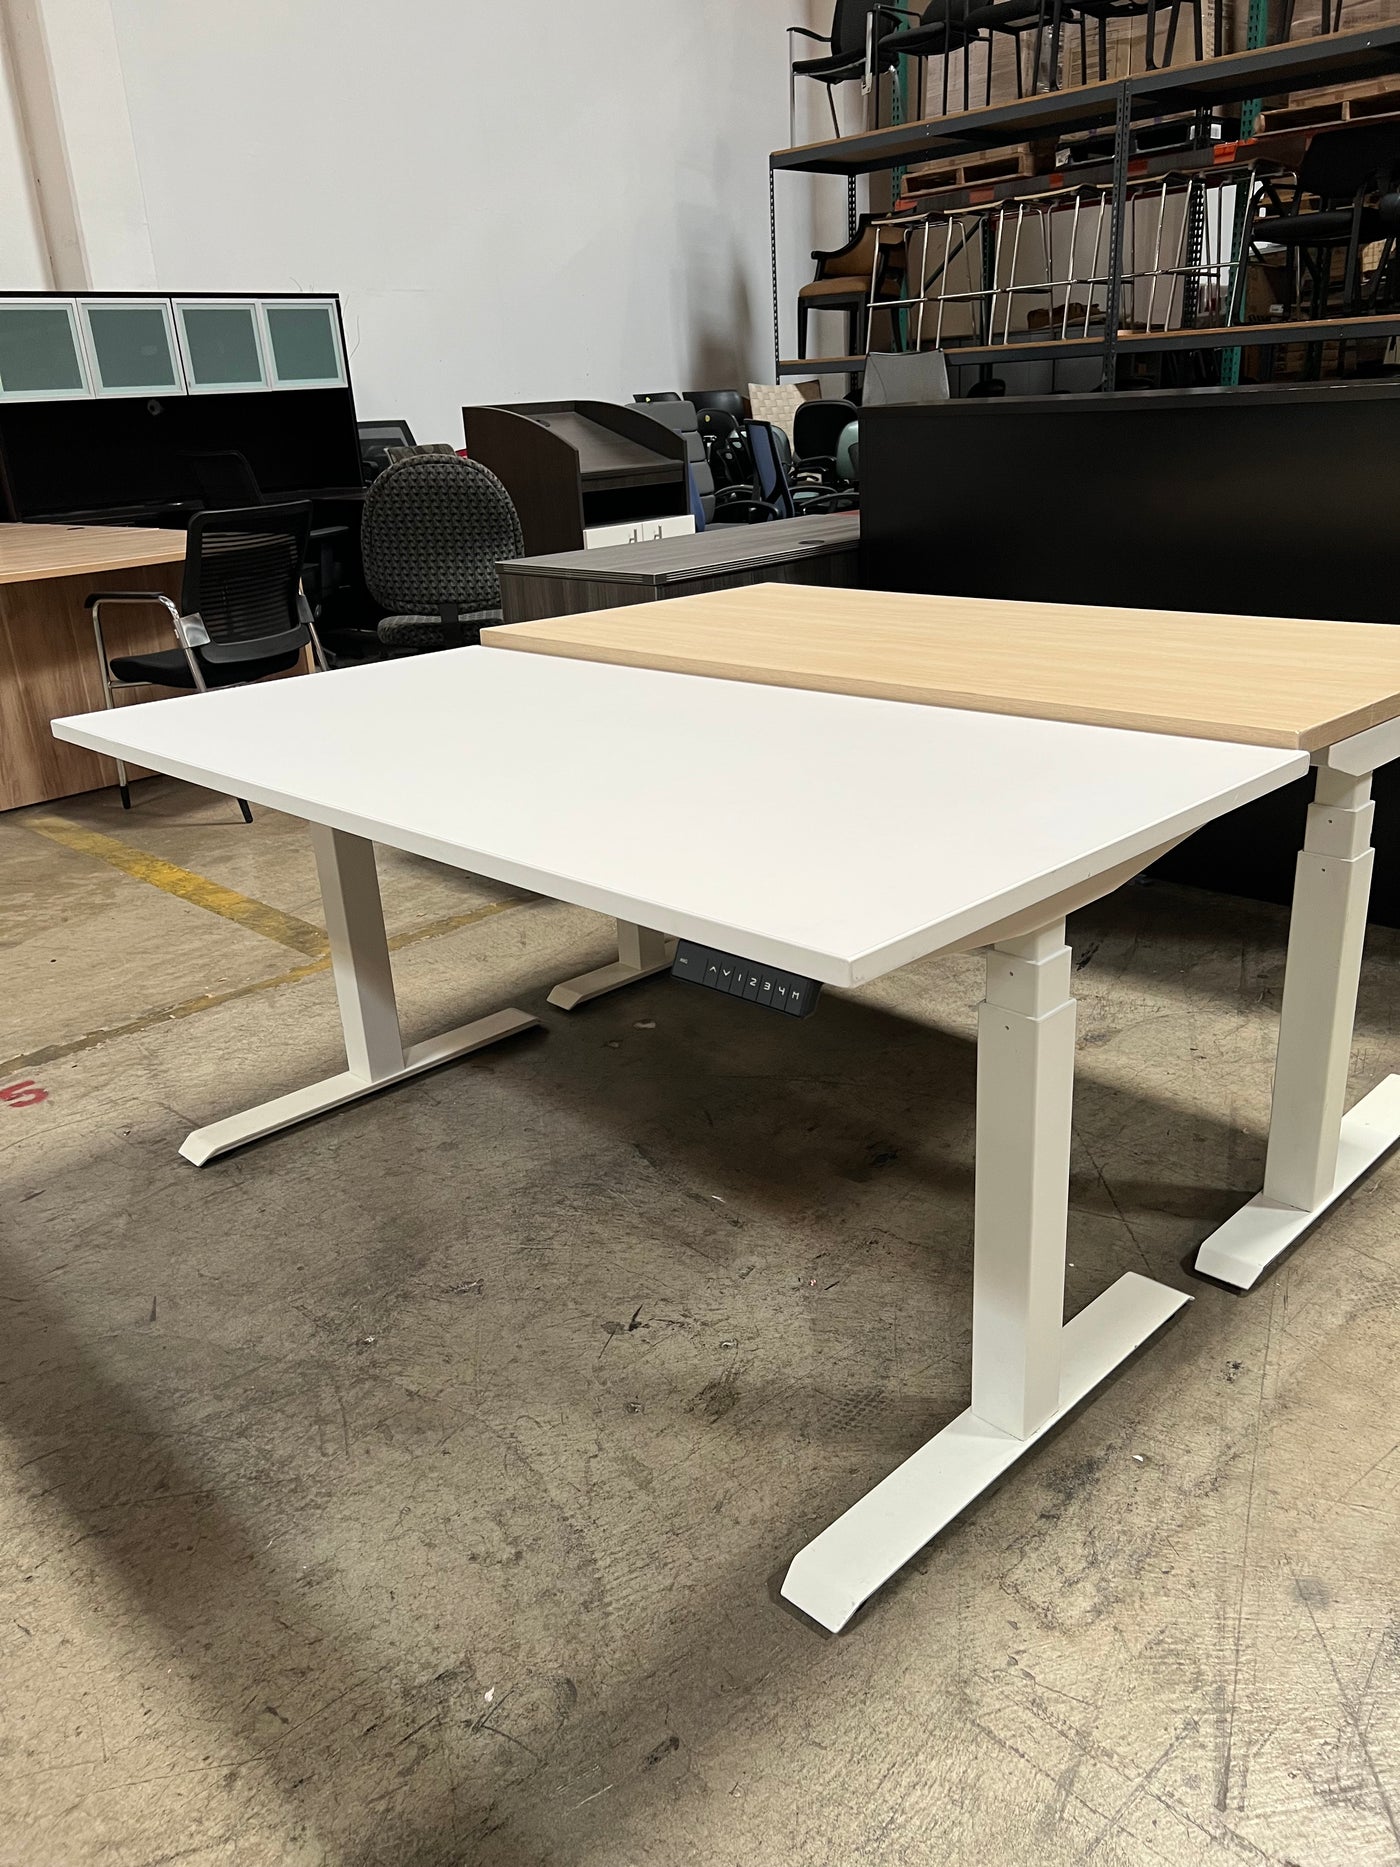 AMQ Sit-to-Stand Desk